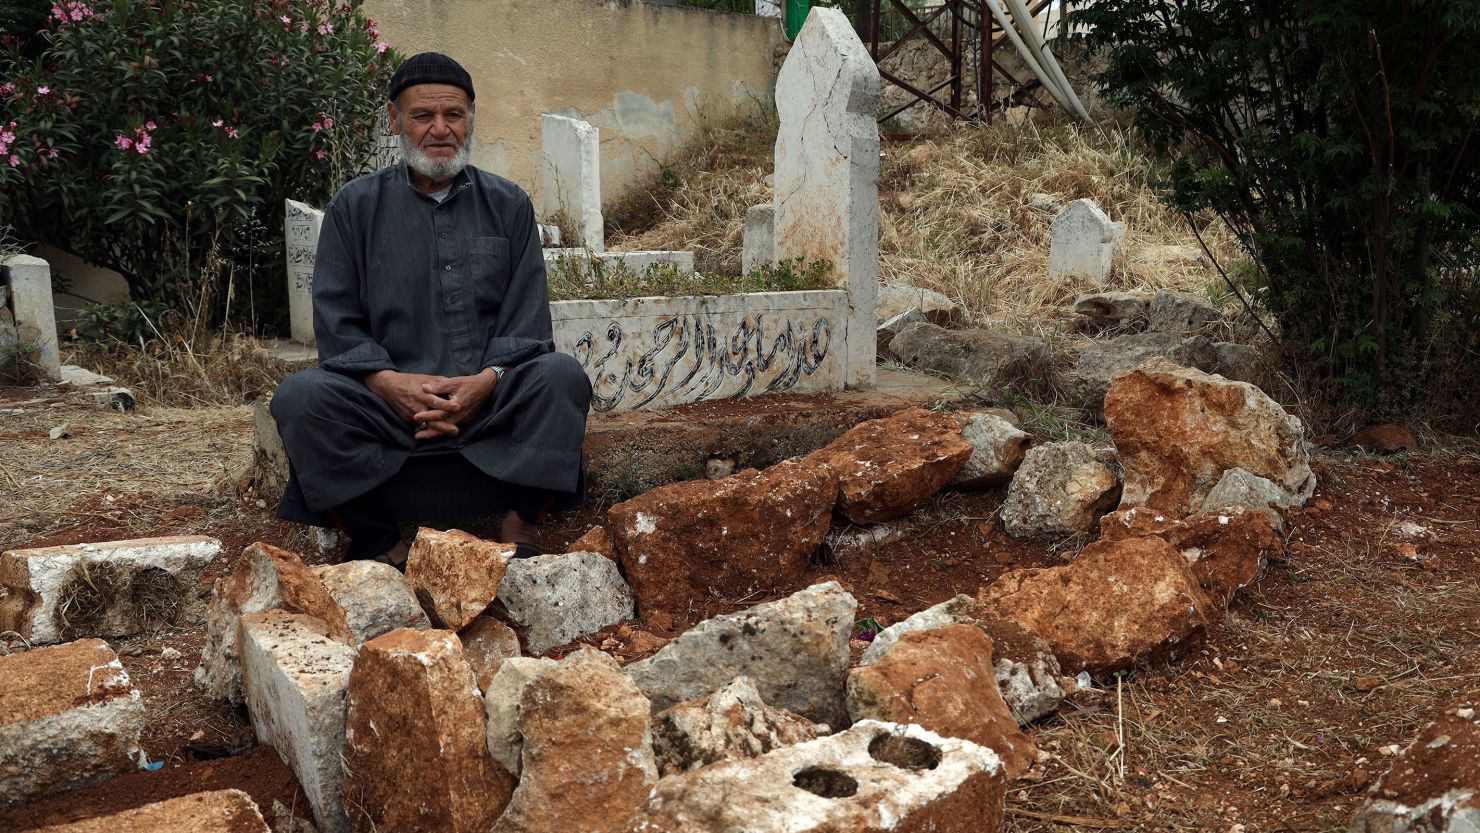 Mohammed Hassan Masto sits next to the grave of his brother Lutfi, who was killed on Wednesday, May 3, in a US military strike, in the village of Qorqanya, a rural area in northern Idlib province, Syria, Sunday, May 7, 2023.